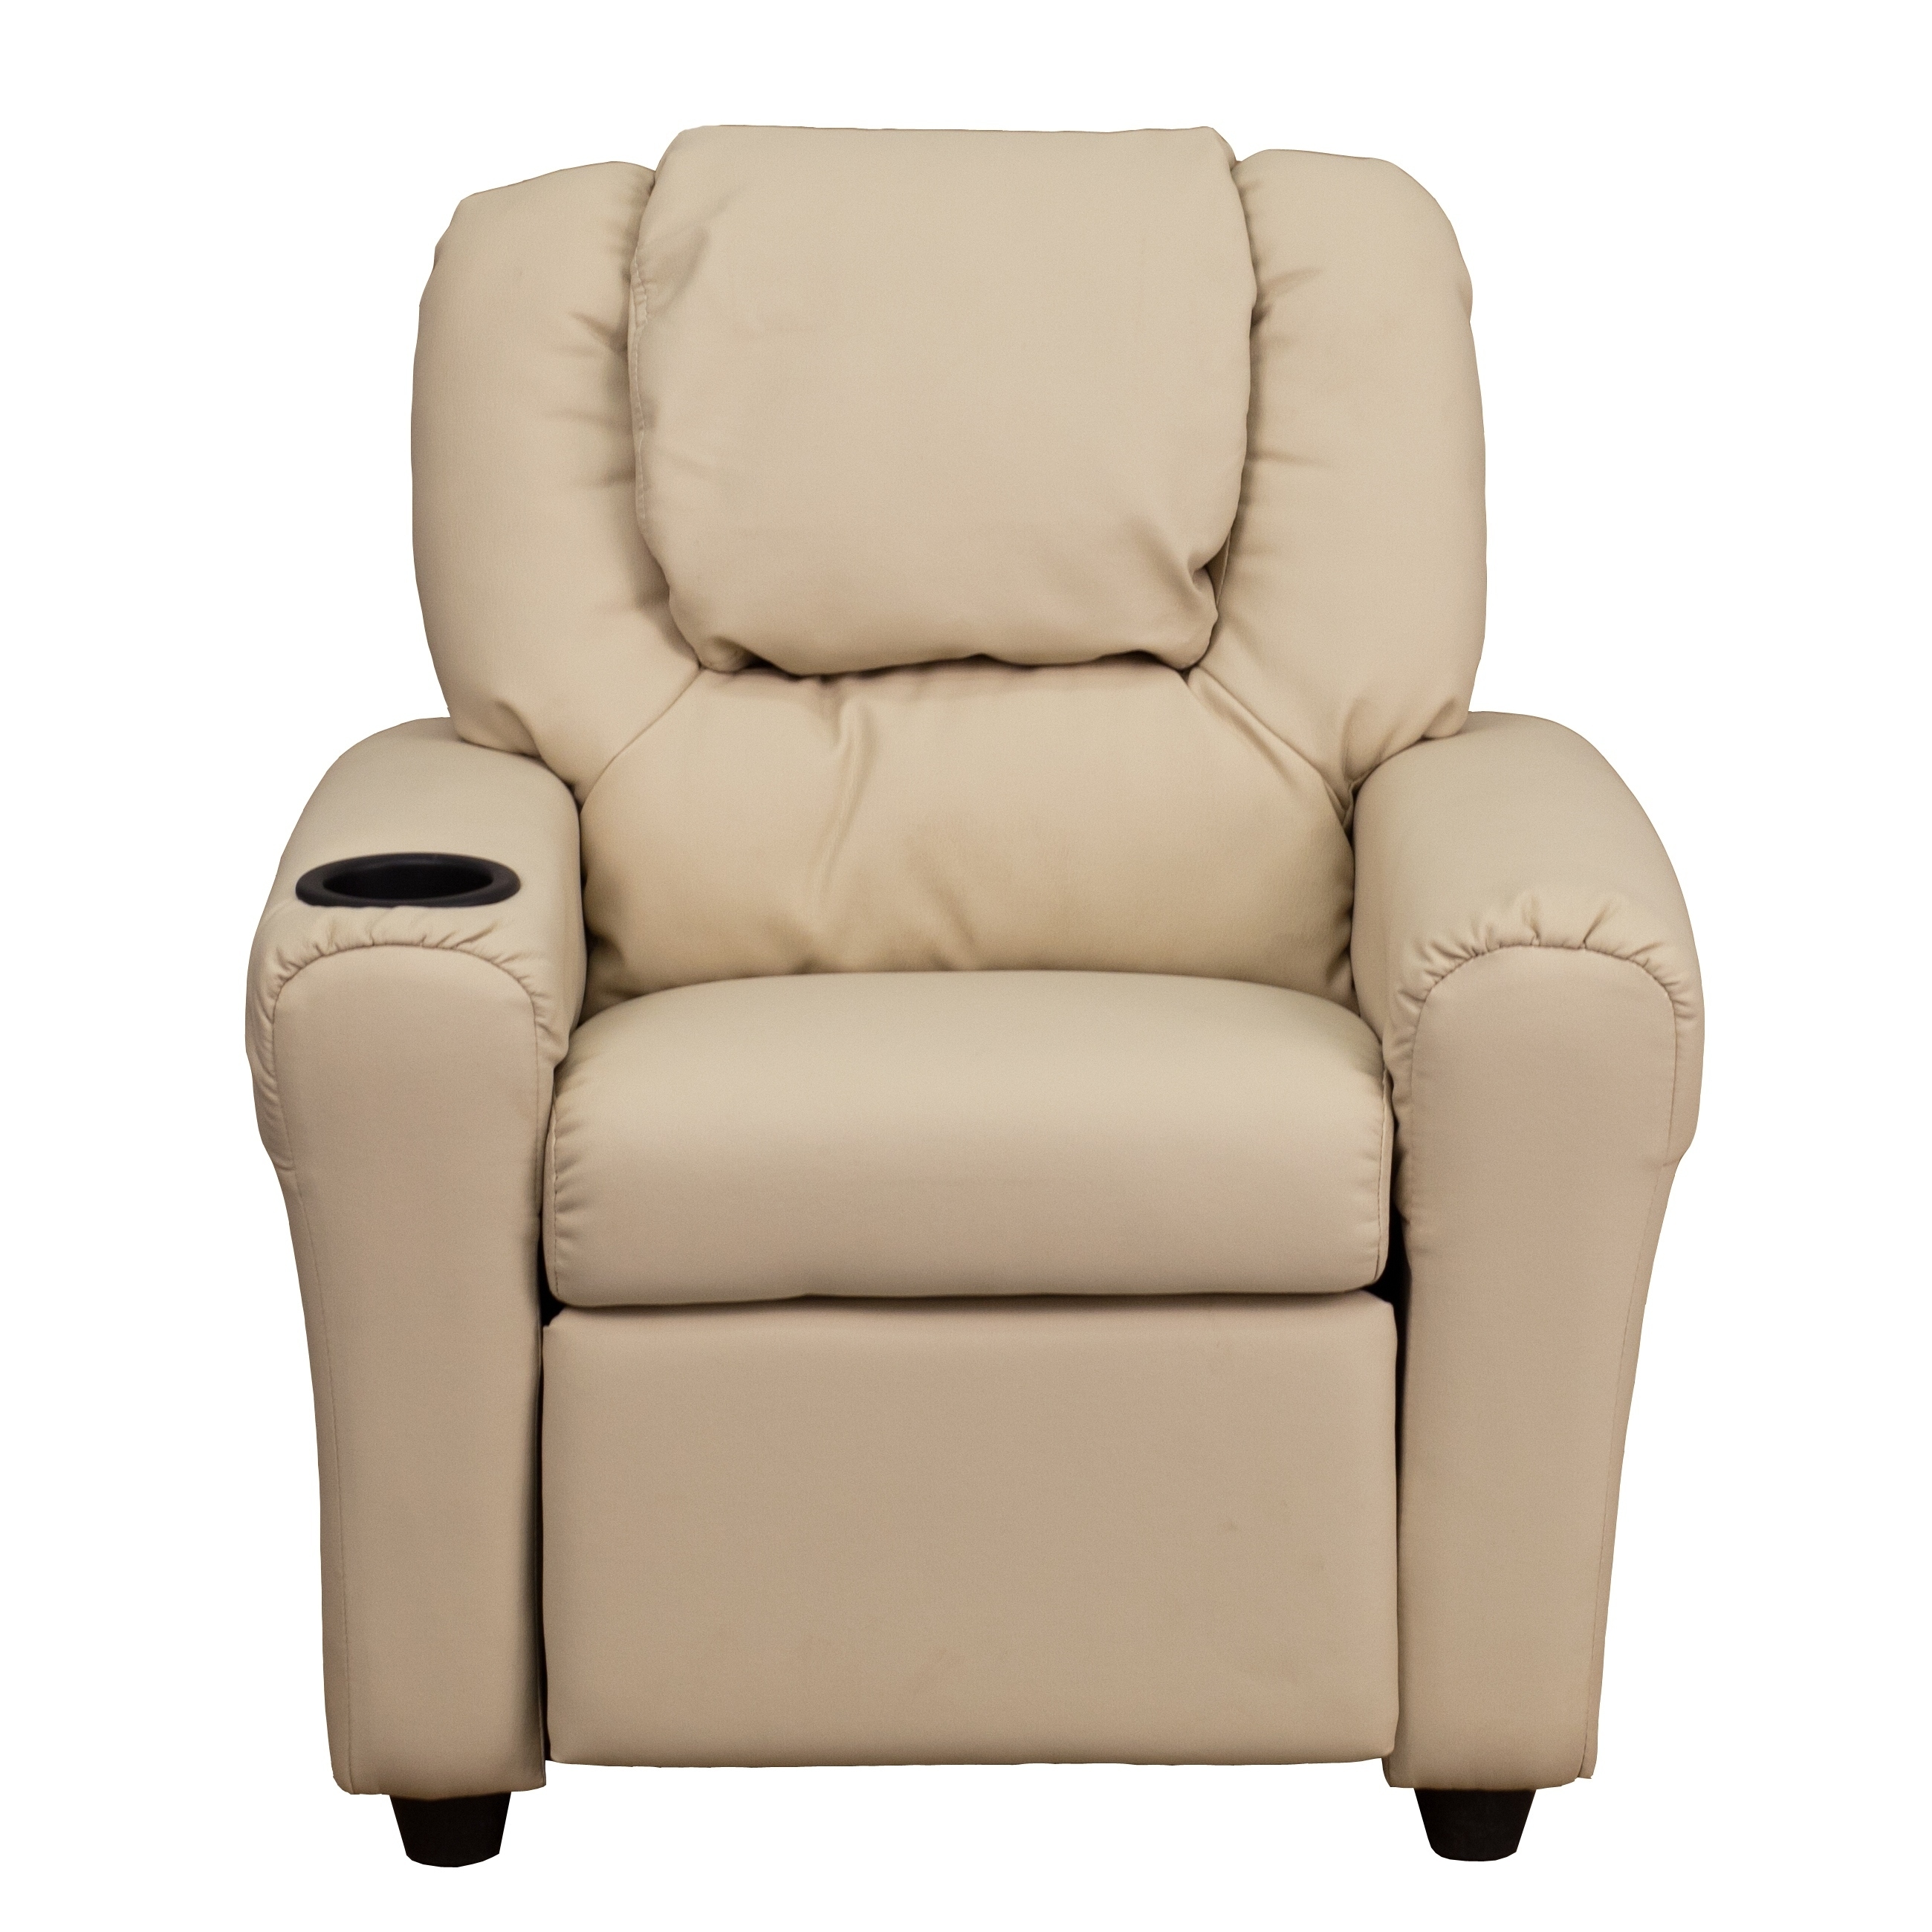 big kid recliner with cup holder